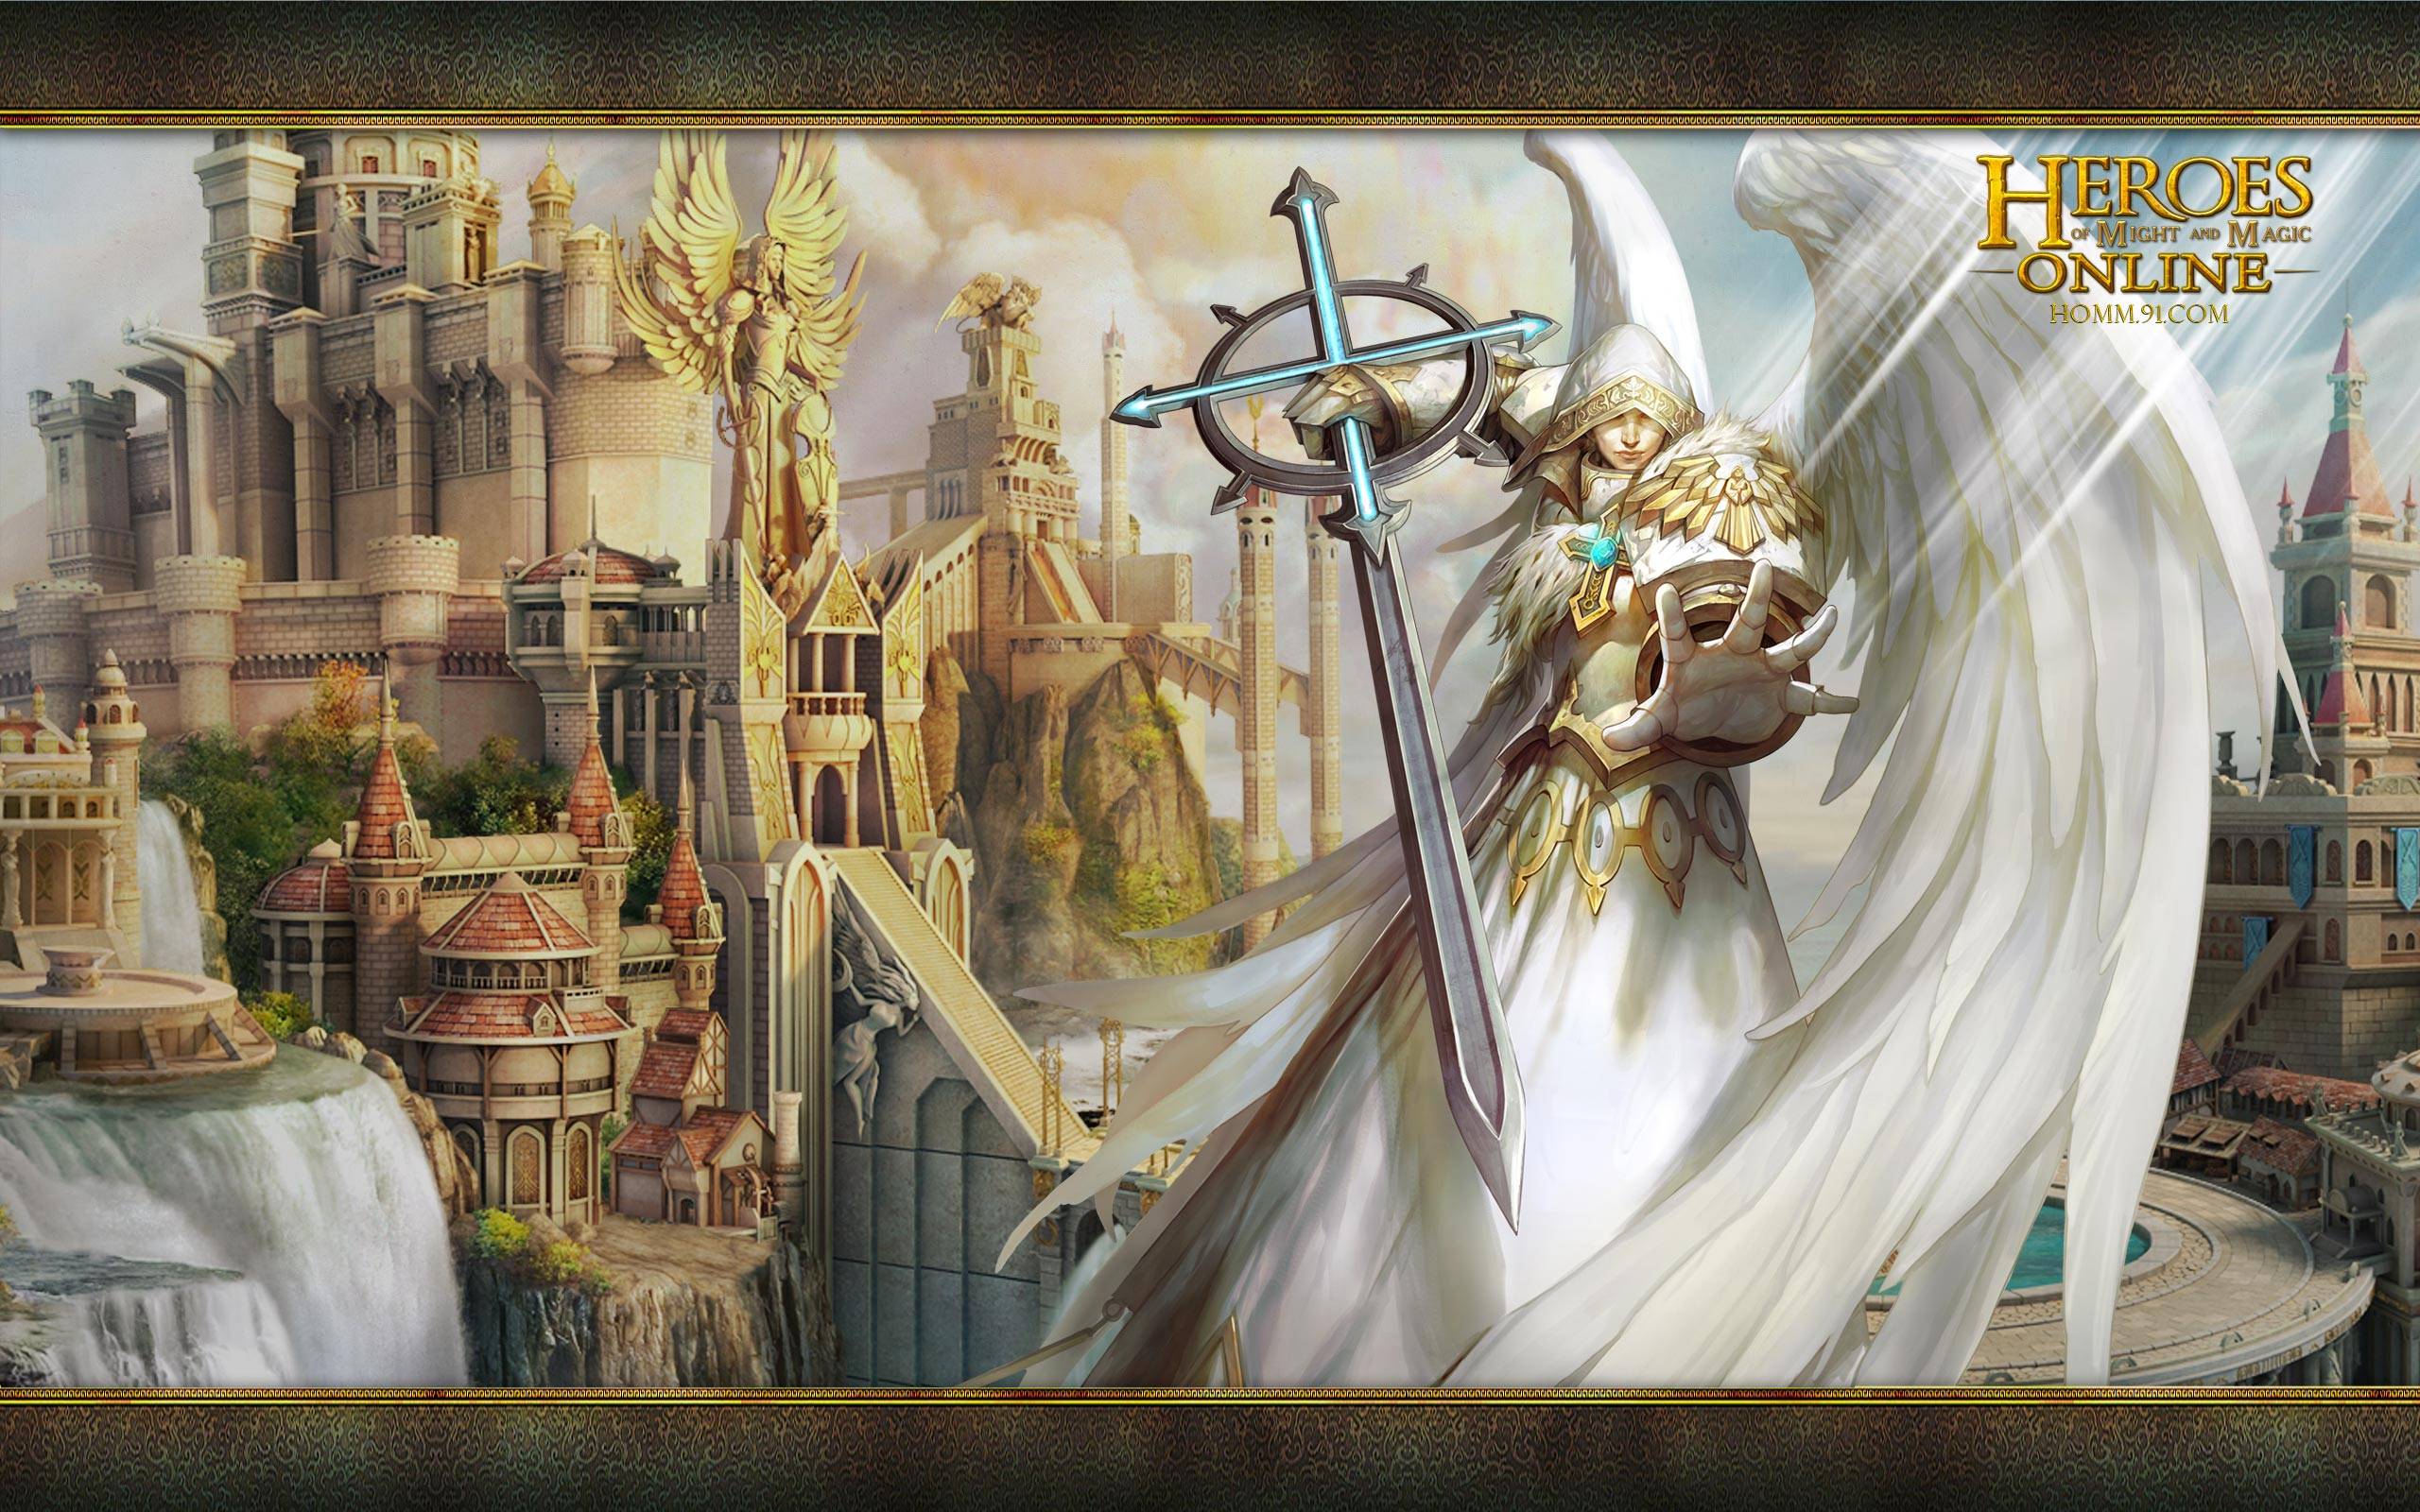 Heroes Of Might And Magic Wallpaper